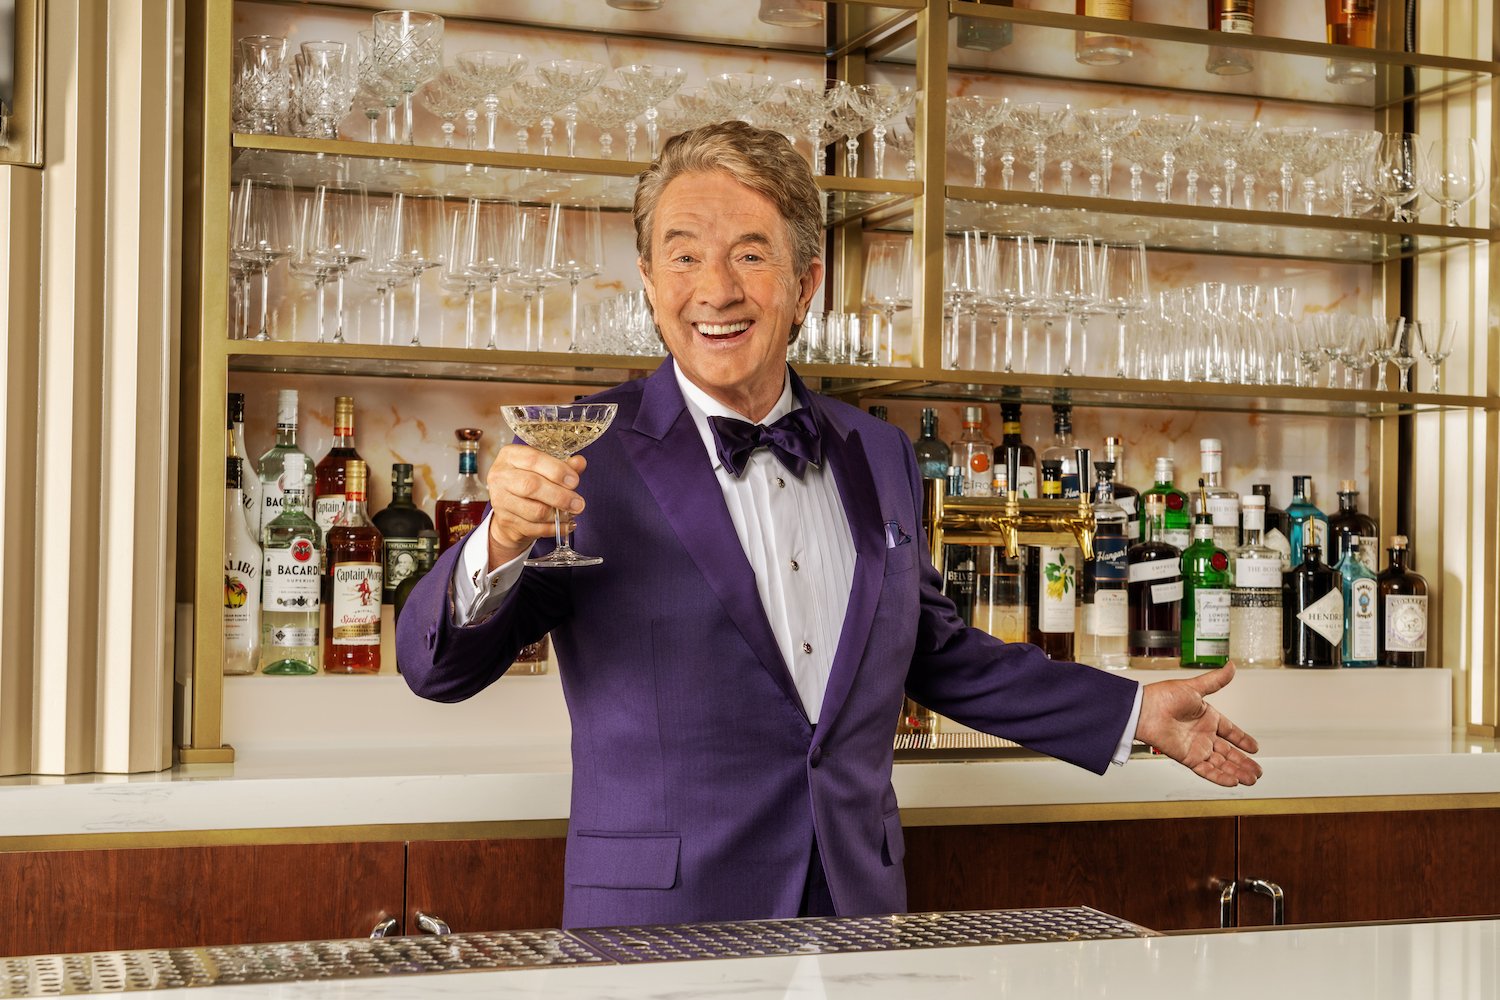 Mayor of Harrah SoCal's Funner, California Martin Short behind a bar holding a martini in a purple suit